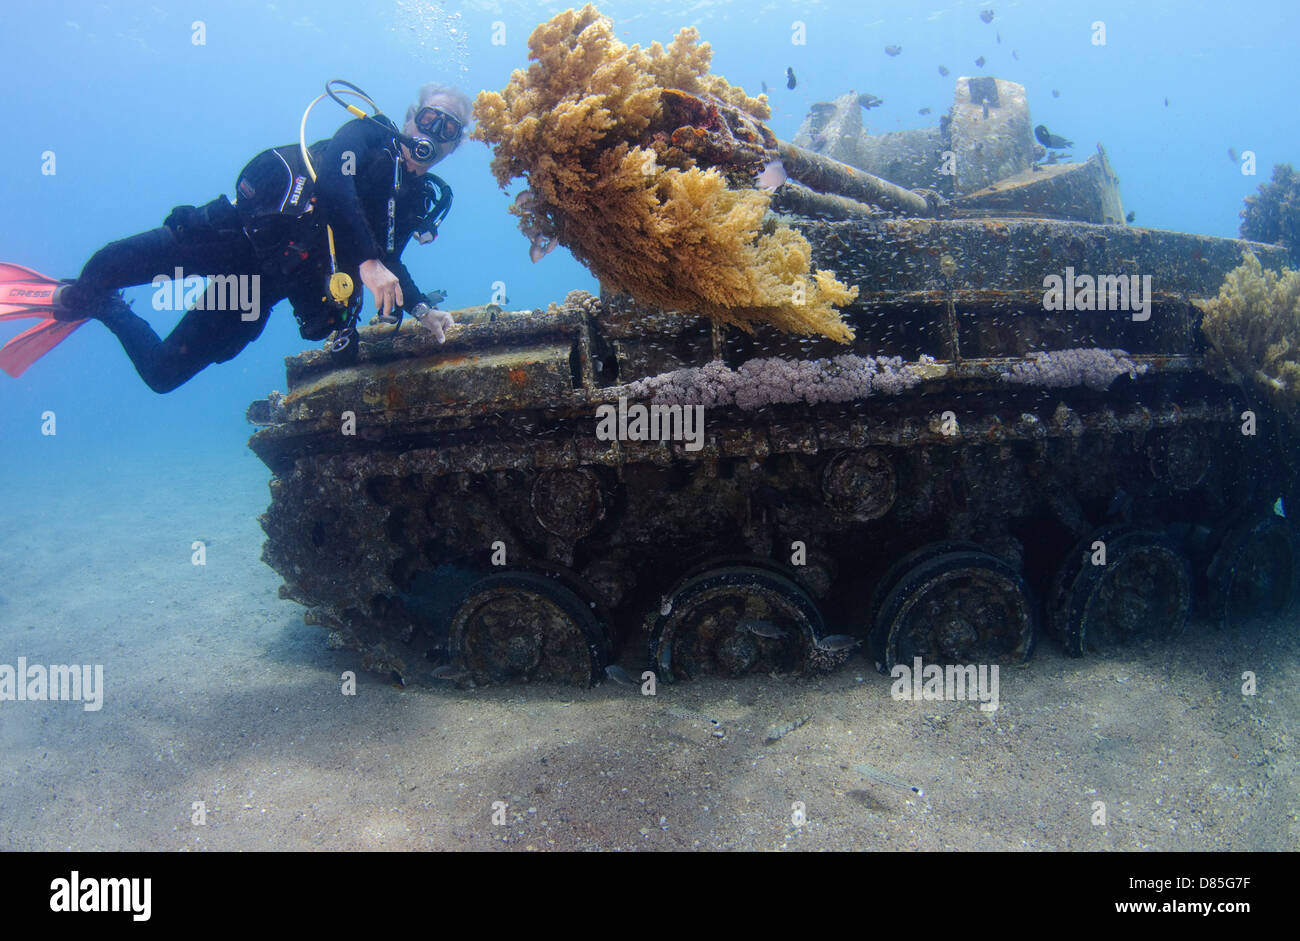 Divers at a sunken tank off the cost of Aqaba, Red Sea Jordan Stock Photo